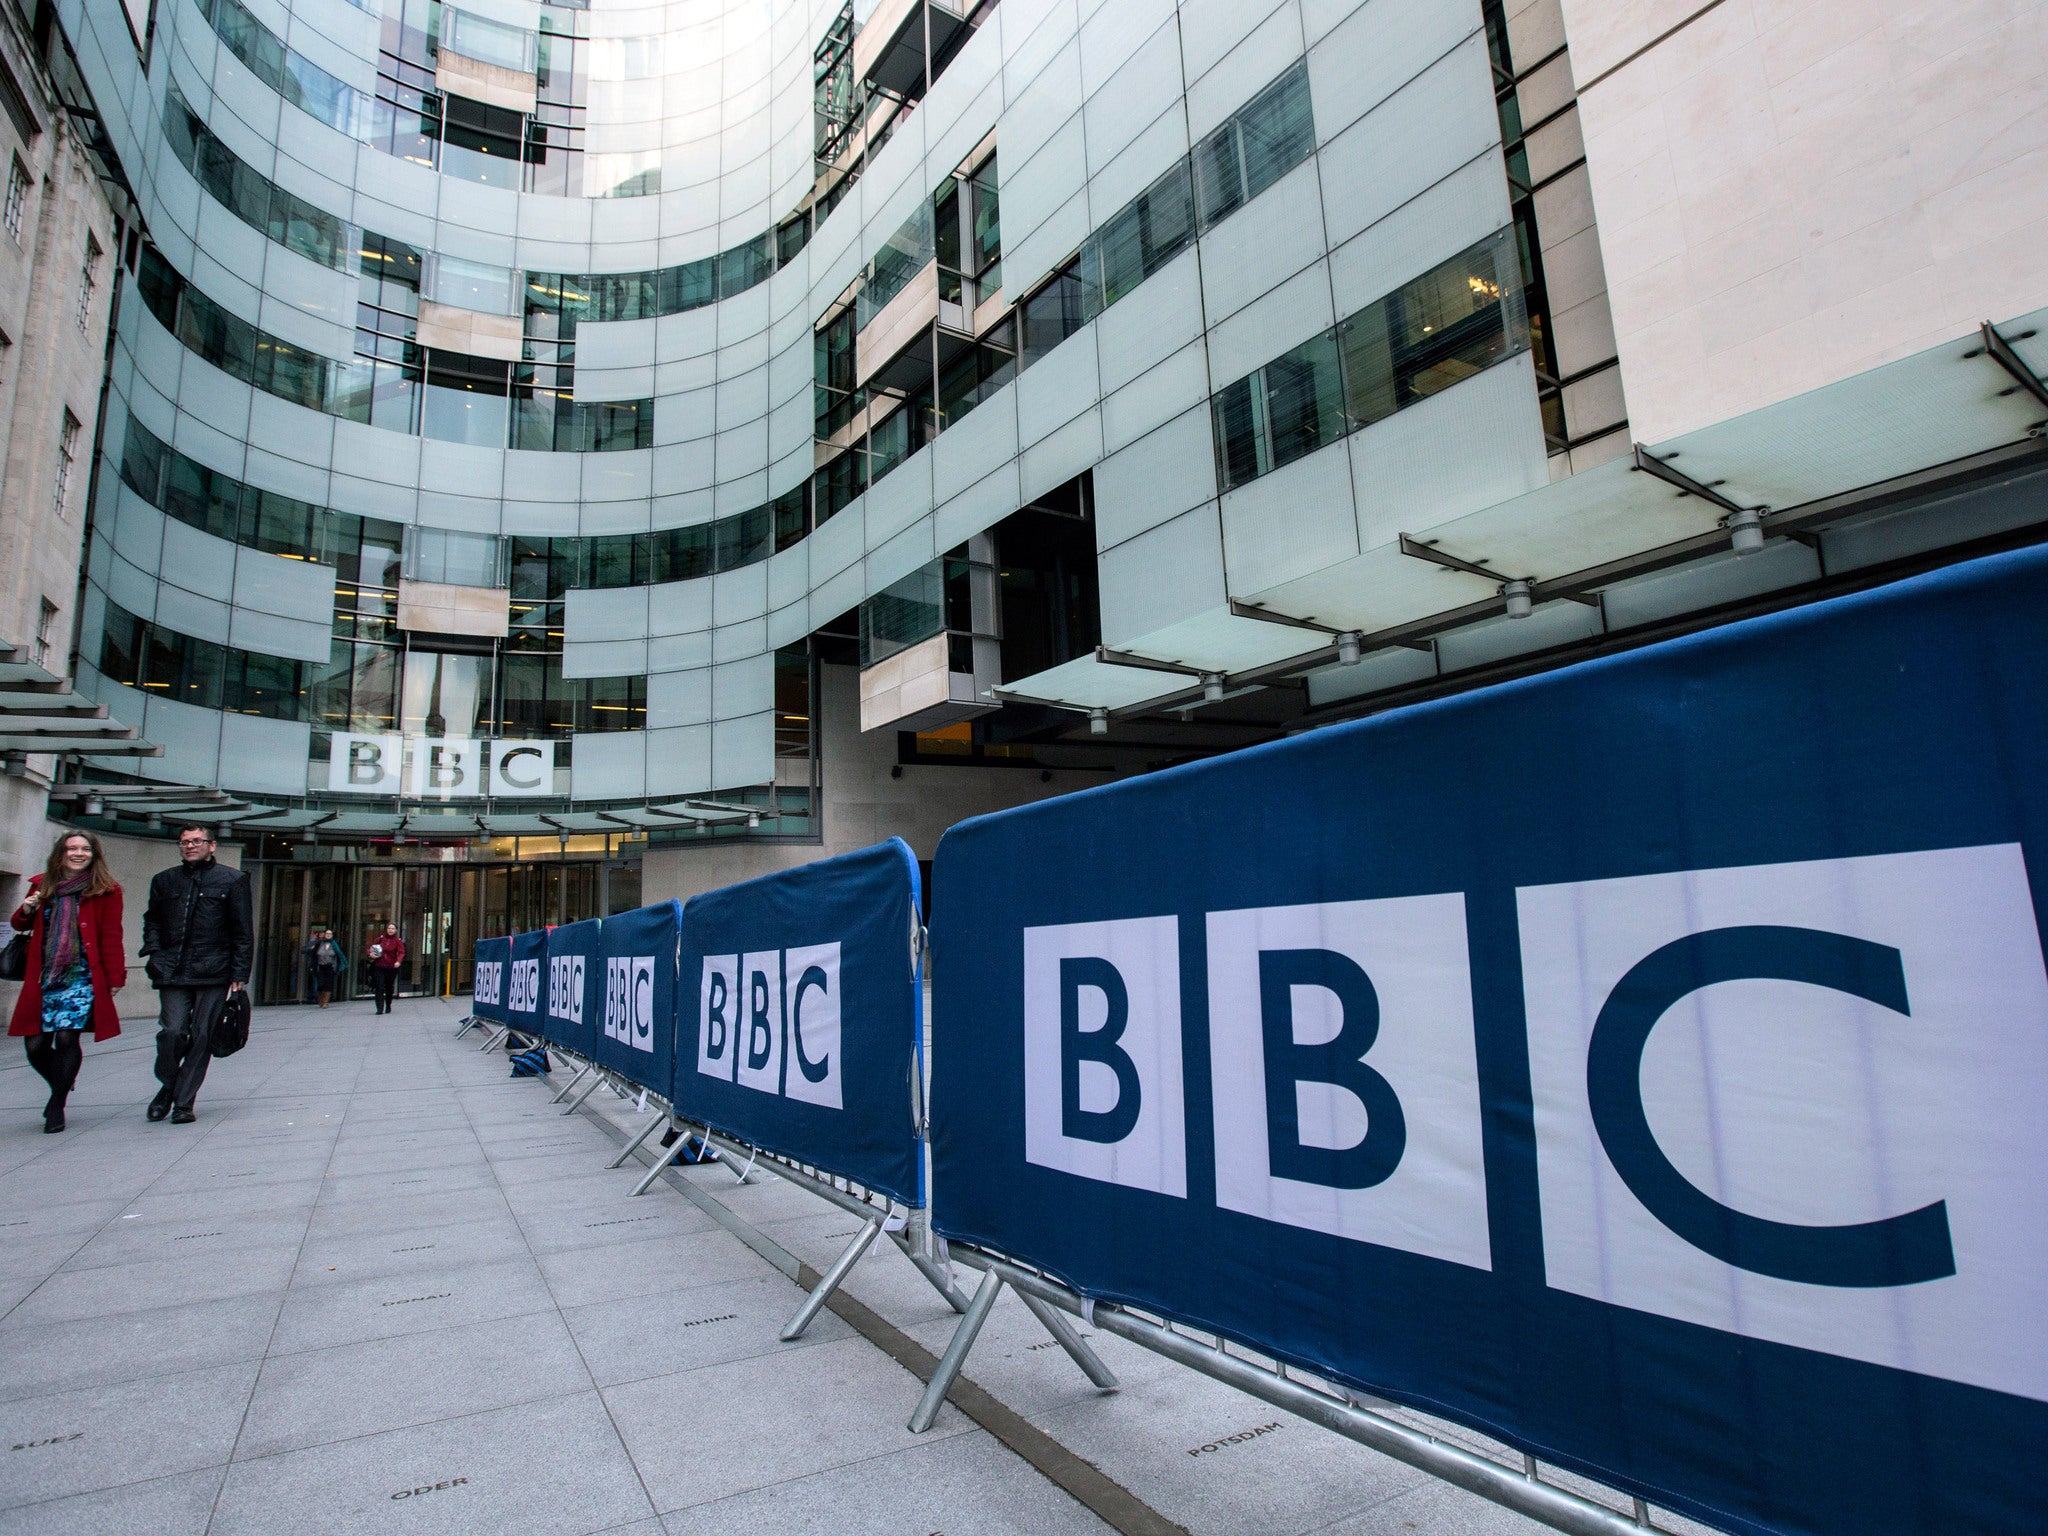 The BBC is anxious to be at the forefront of media technology